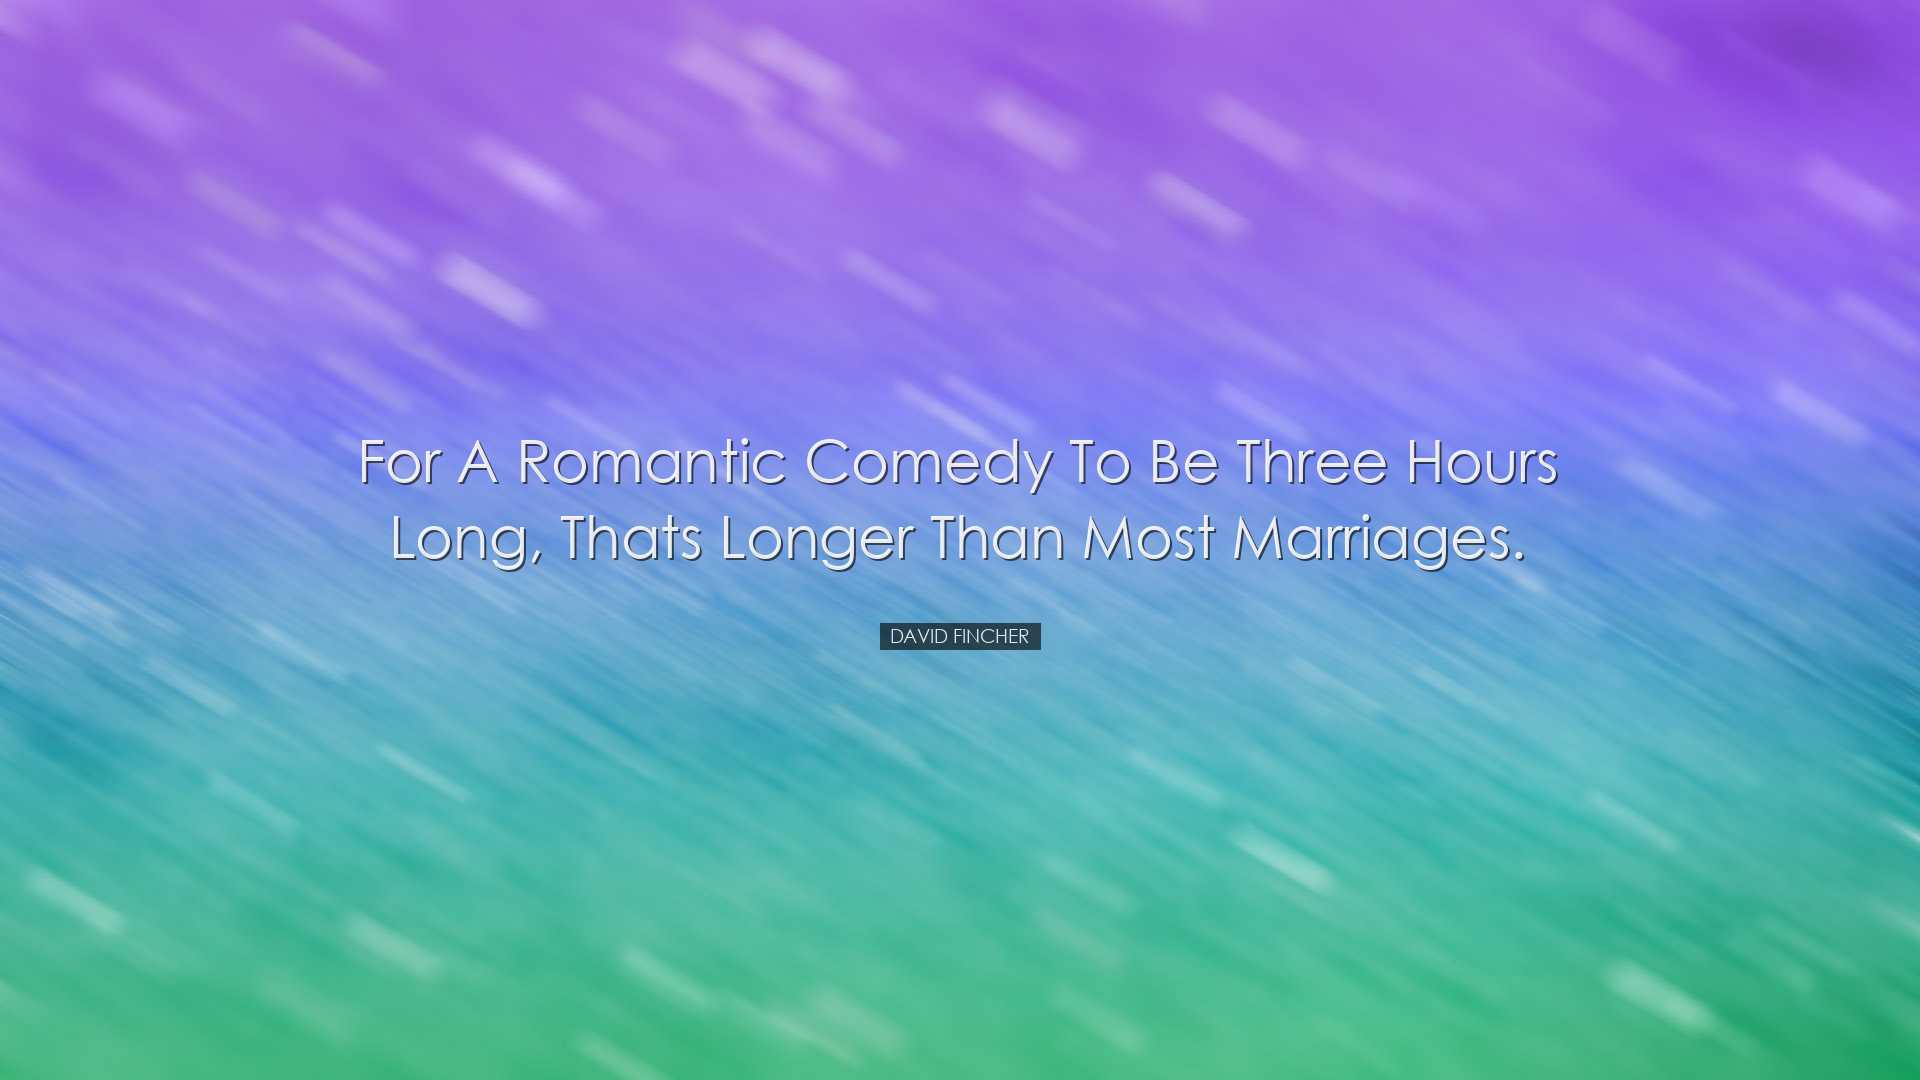 For a romantic comedy to be three hours long, thats longer than mo